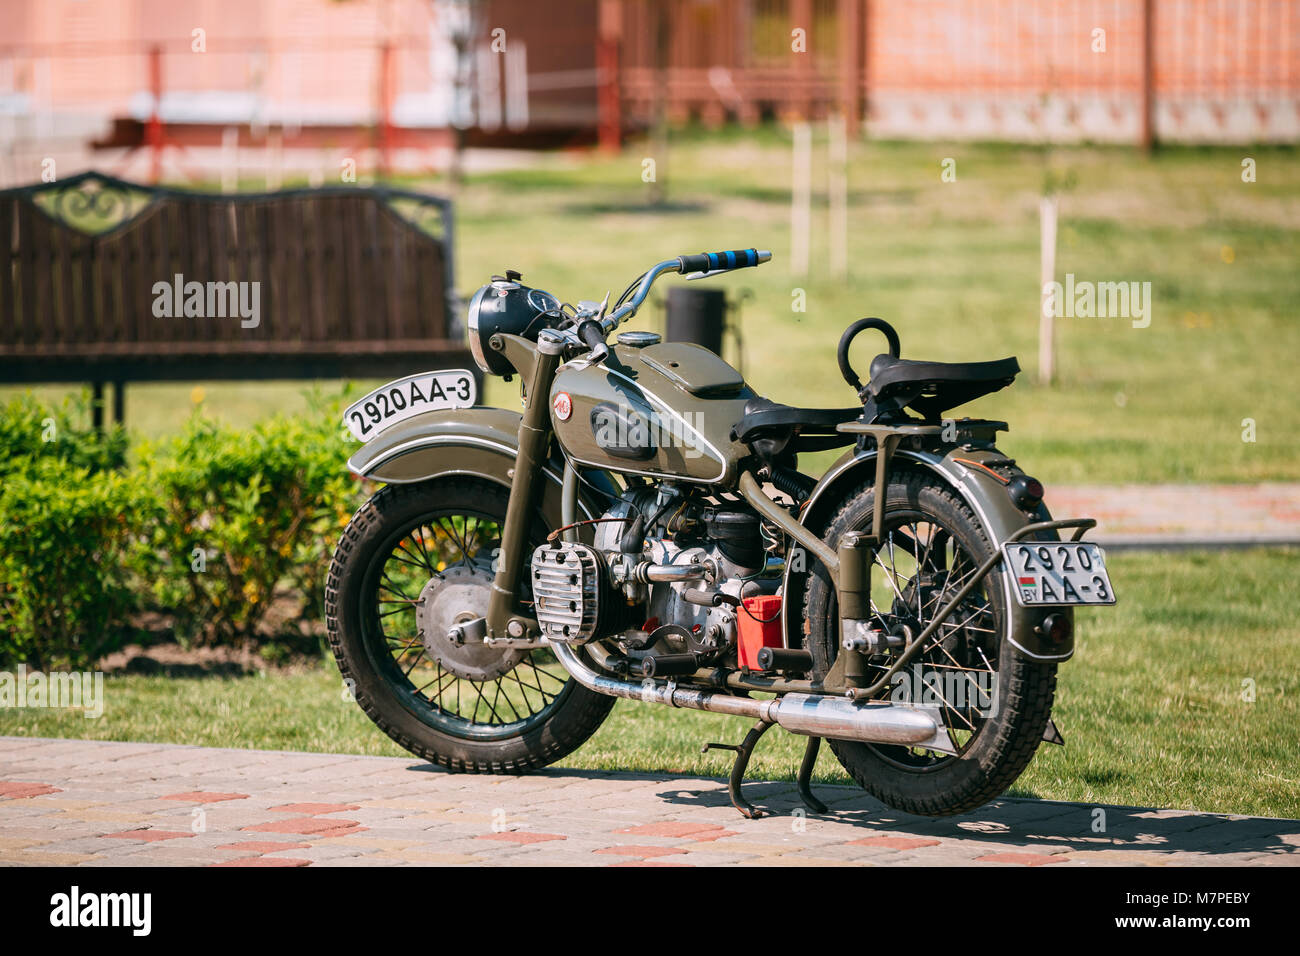 Gomel, Belarus - May 9, 2016: IMZ M-52 Ural, The Old Rarity Soviet Two-Wheeled Khaki Motorcycle, Standing On The Pavement In Sunny Summer Park. Stock Photo